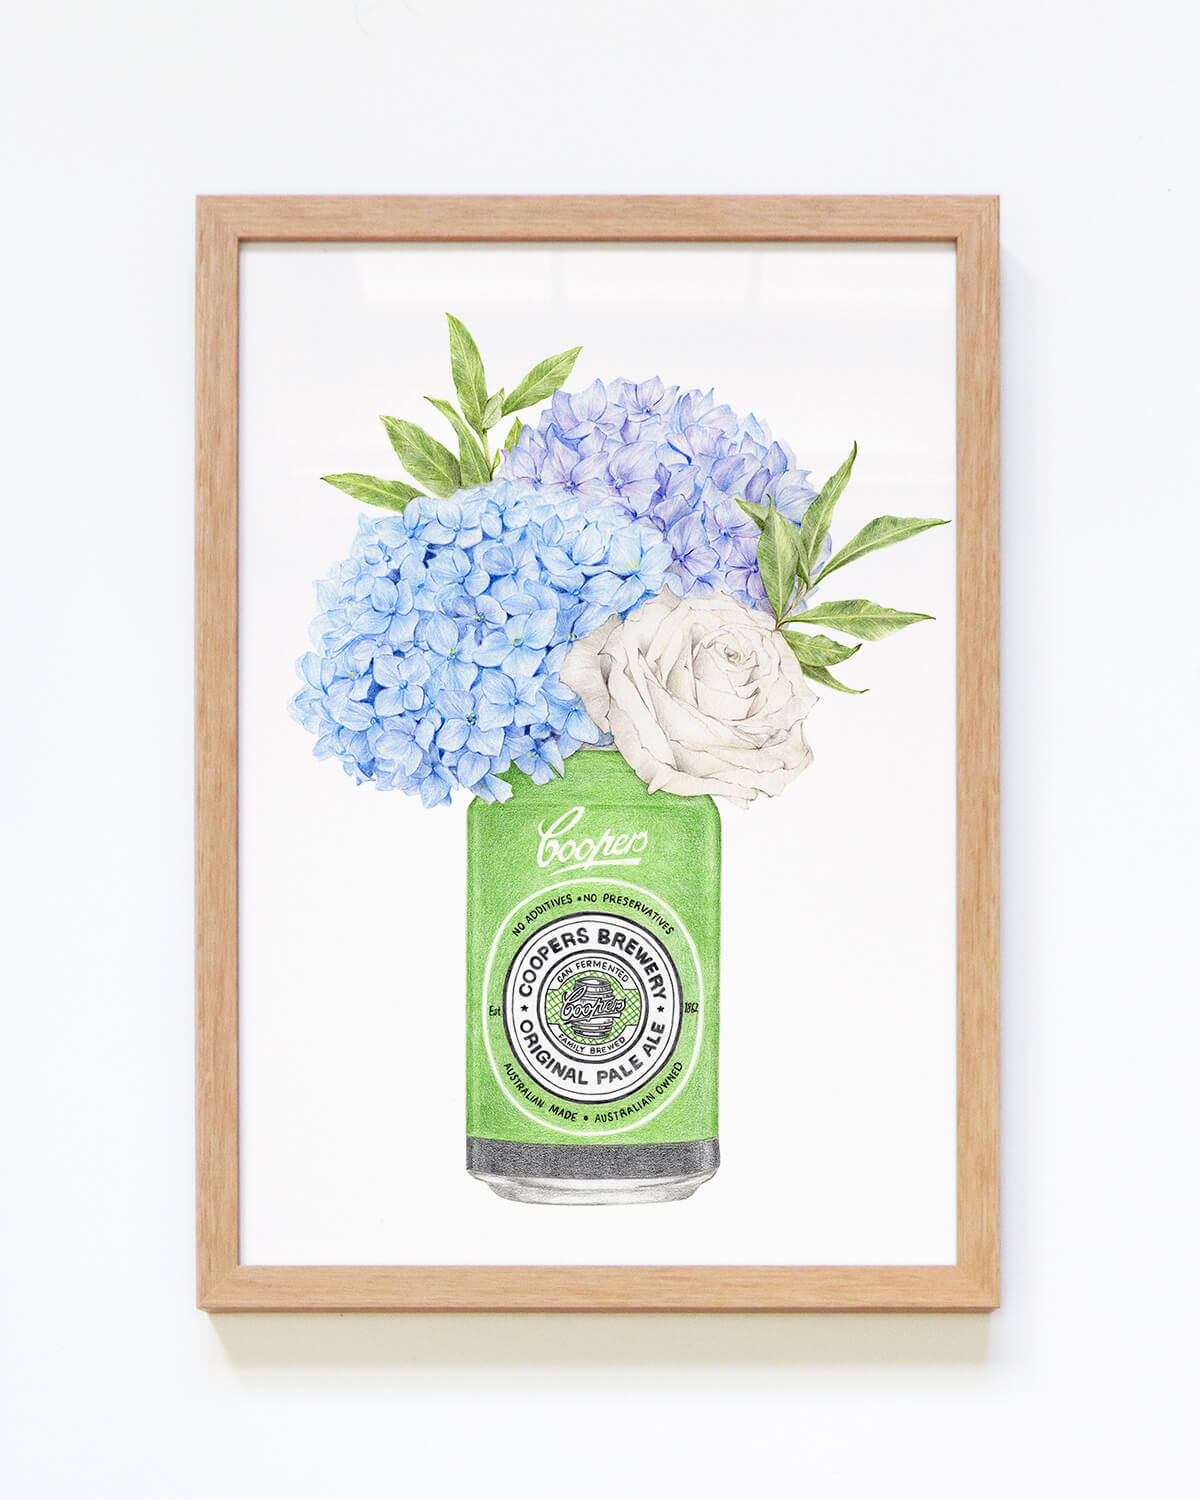 Custom framed Coopers Pale Ale with hydrangeas art print